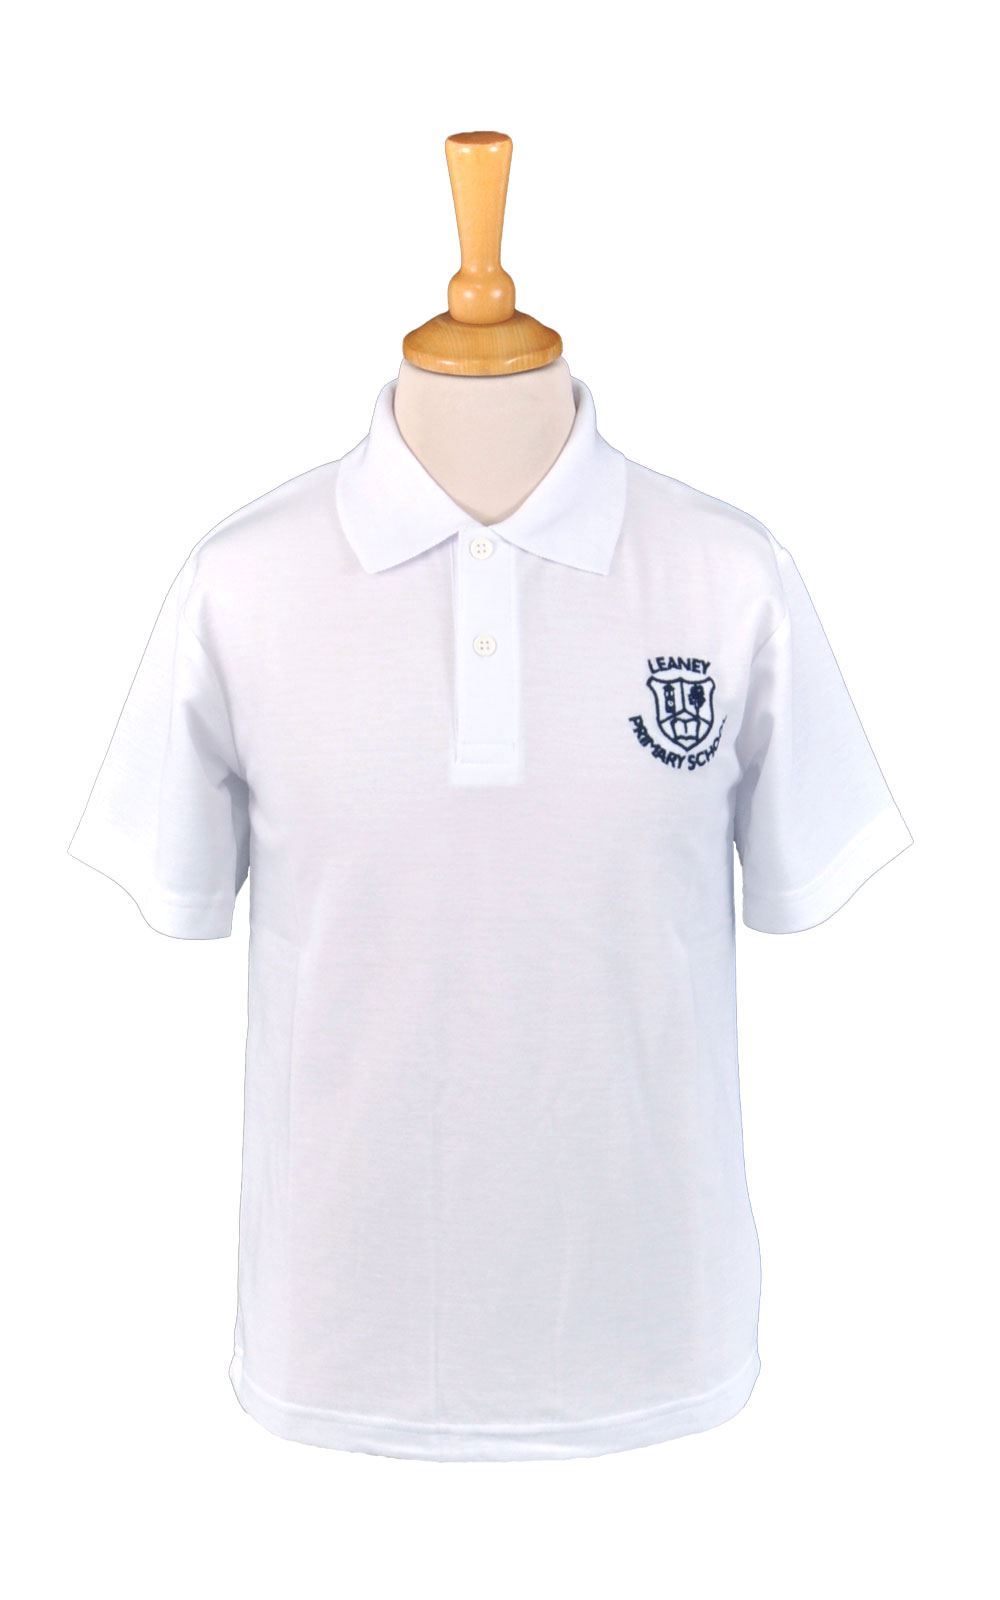 Picture of Leaney PS Polo Shirt - Woodbank